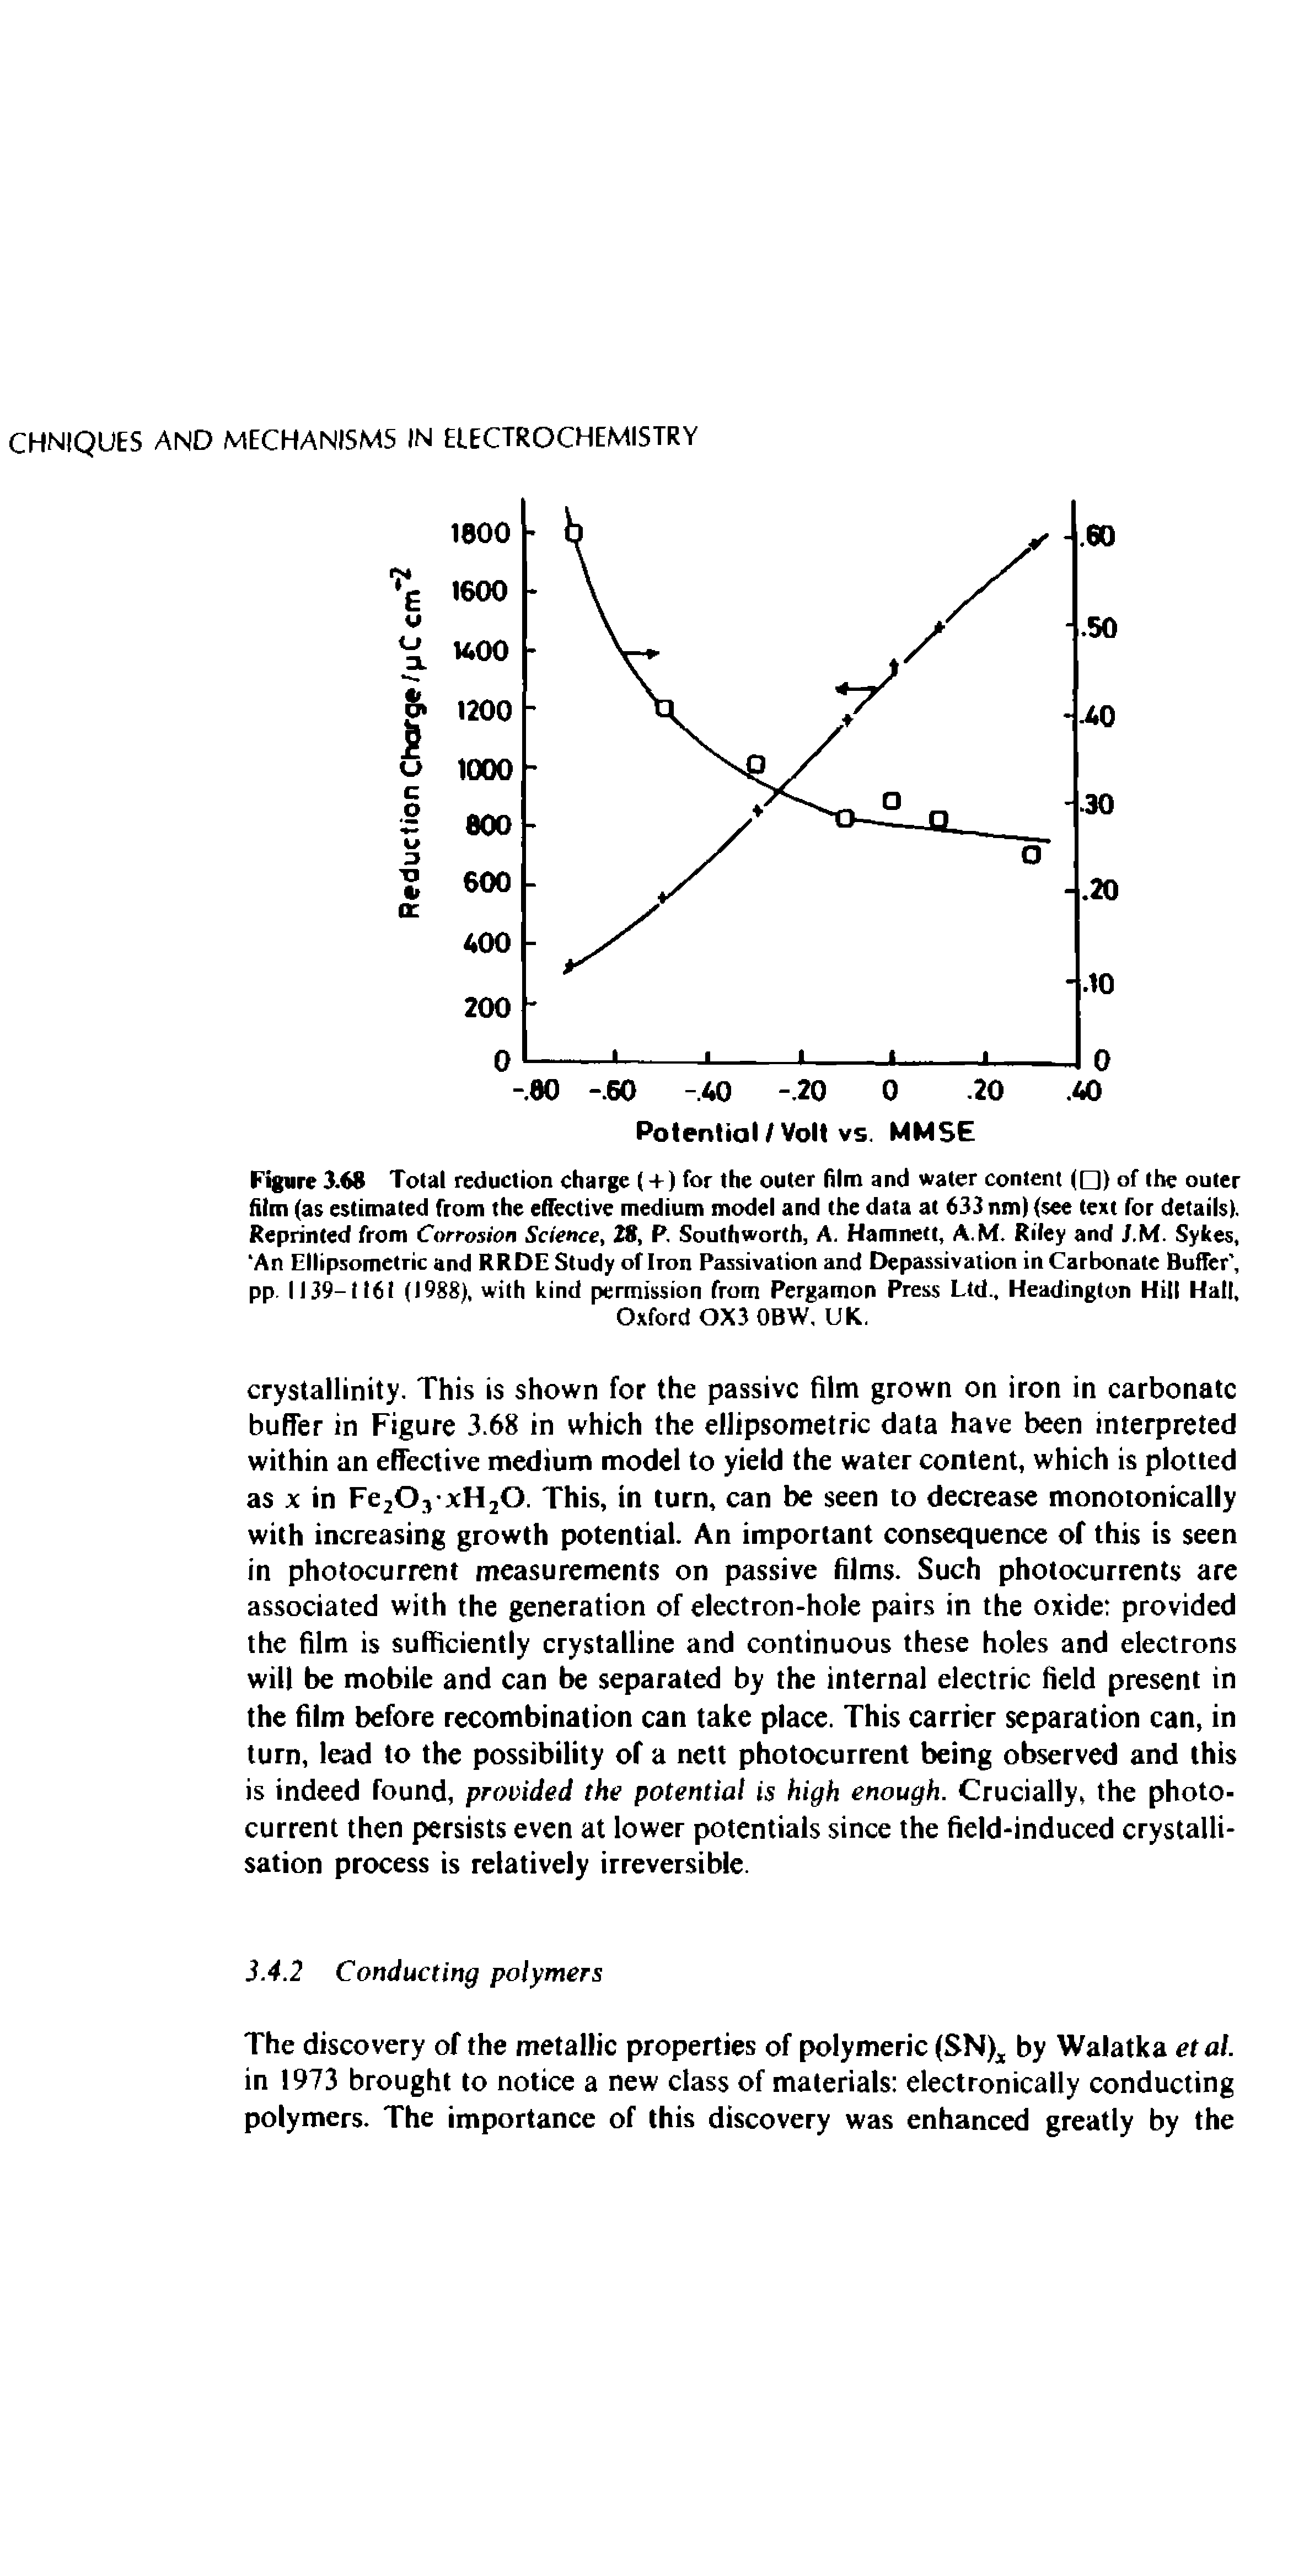 Figure 3.68 Total reduction charge (+ ) for the outer film and water content ( ) of the outer film (as estimated from the effective medium model and the data at 633 nm (see text for details). Reprinted from Corrosion Science, 28, P. Southworth, A. Hamnett, A.M. Riley and J.M. Sykes, An Ellipsometric and RRDE Study of Iron Passivation and Depassivation in Carbonate BufTer, pp. 1139-1161 (1988), with kind permission from Pergamon Press Ltd., Headington Hill Hall,...